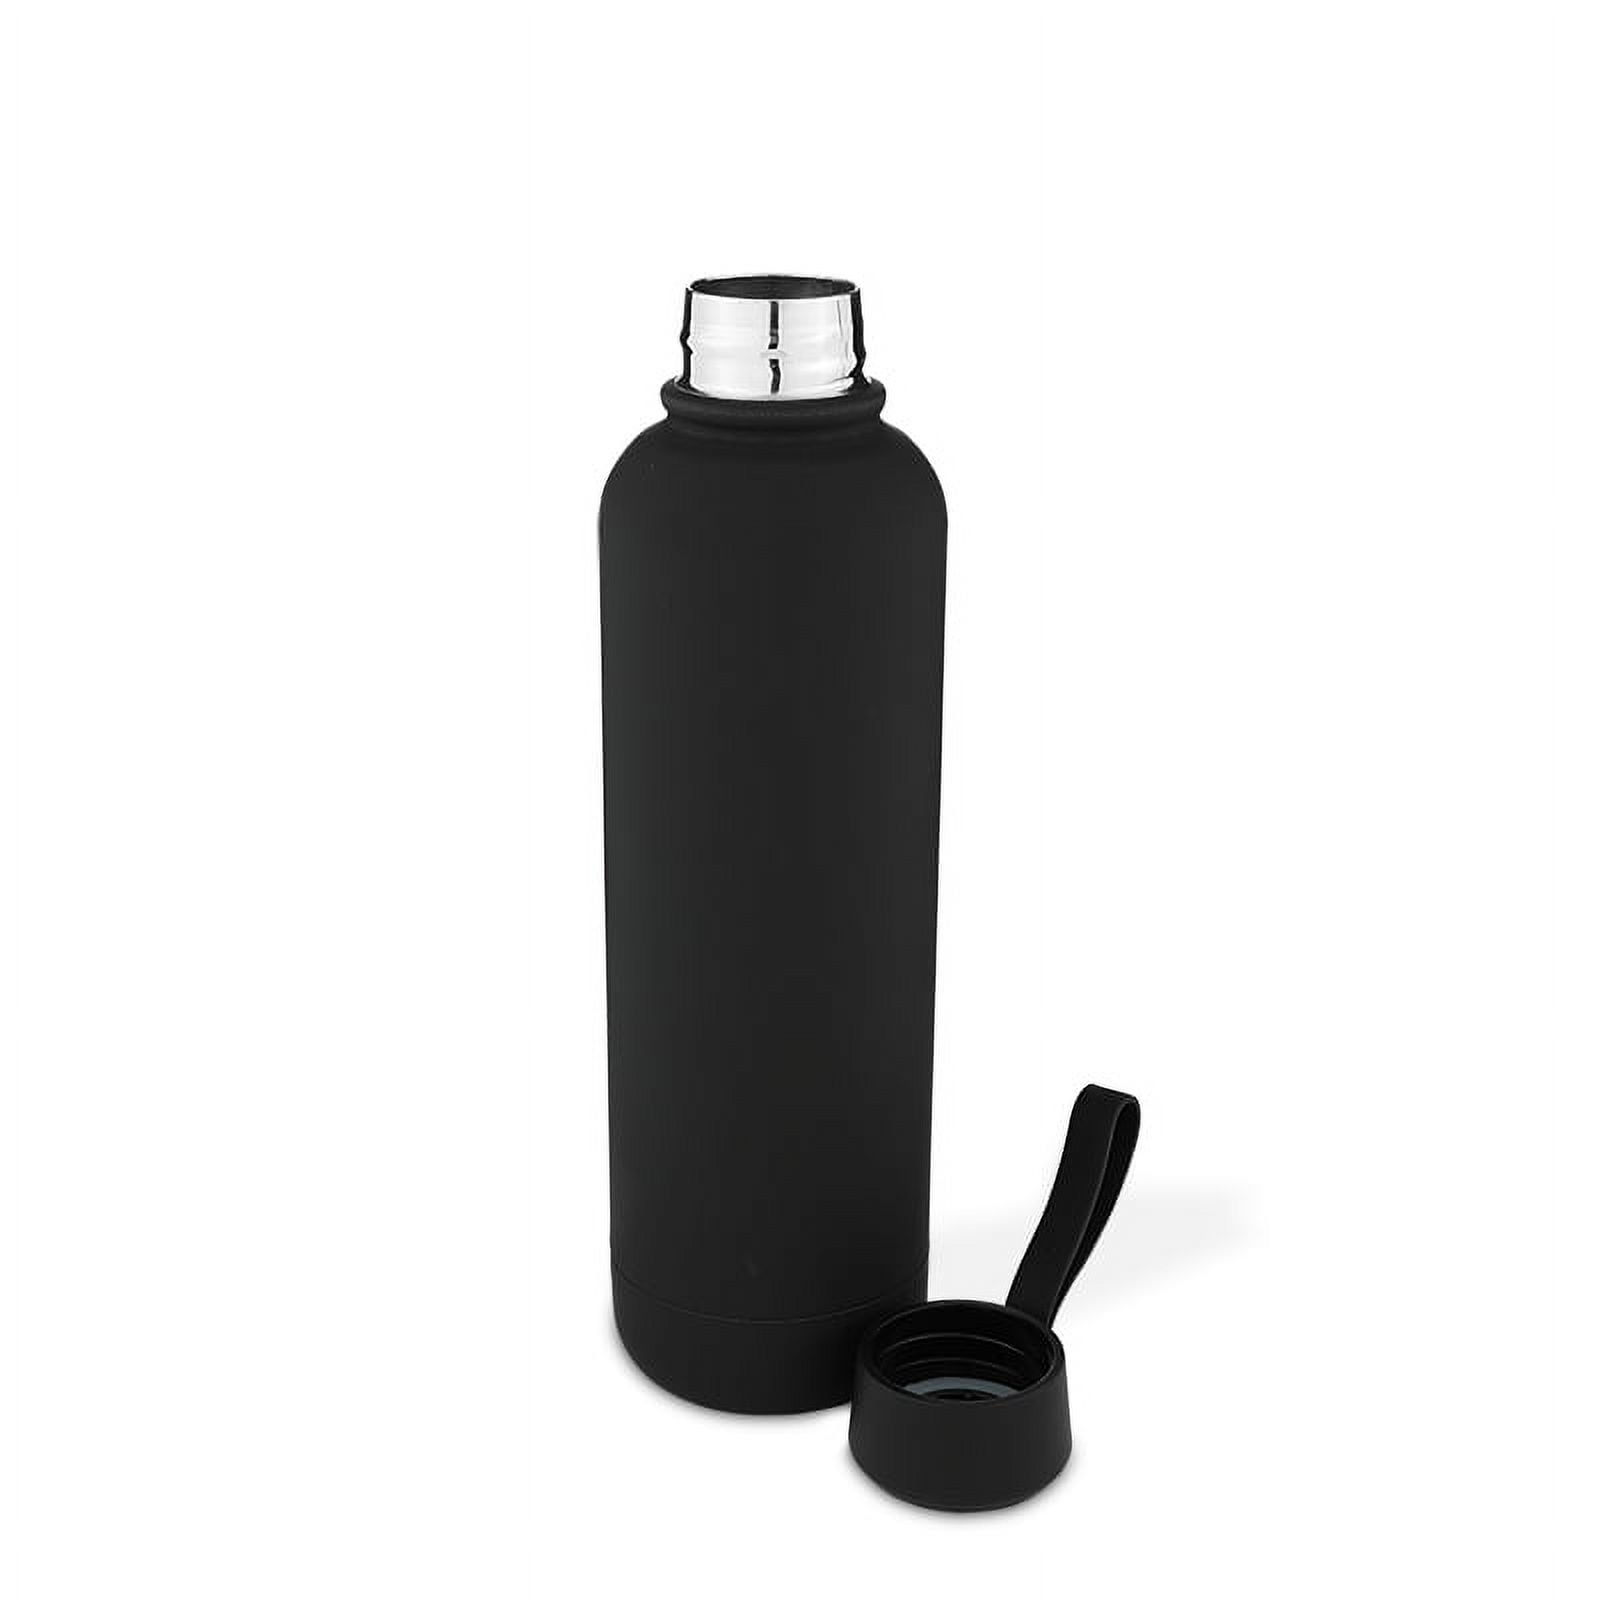 Perka® Altair Double Wall, Stainless Steel Water Bottle 17 oz.